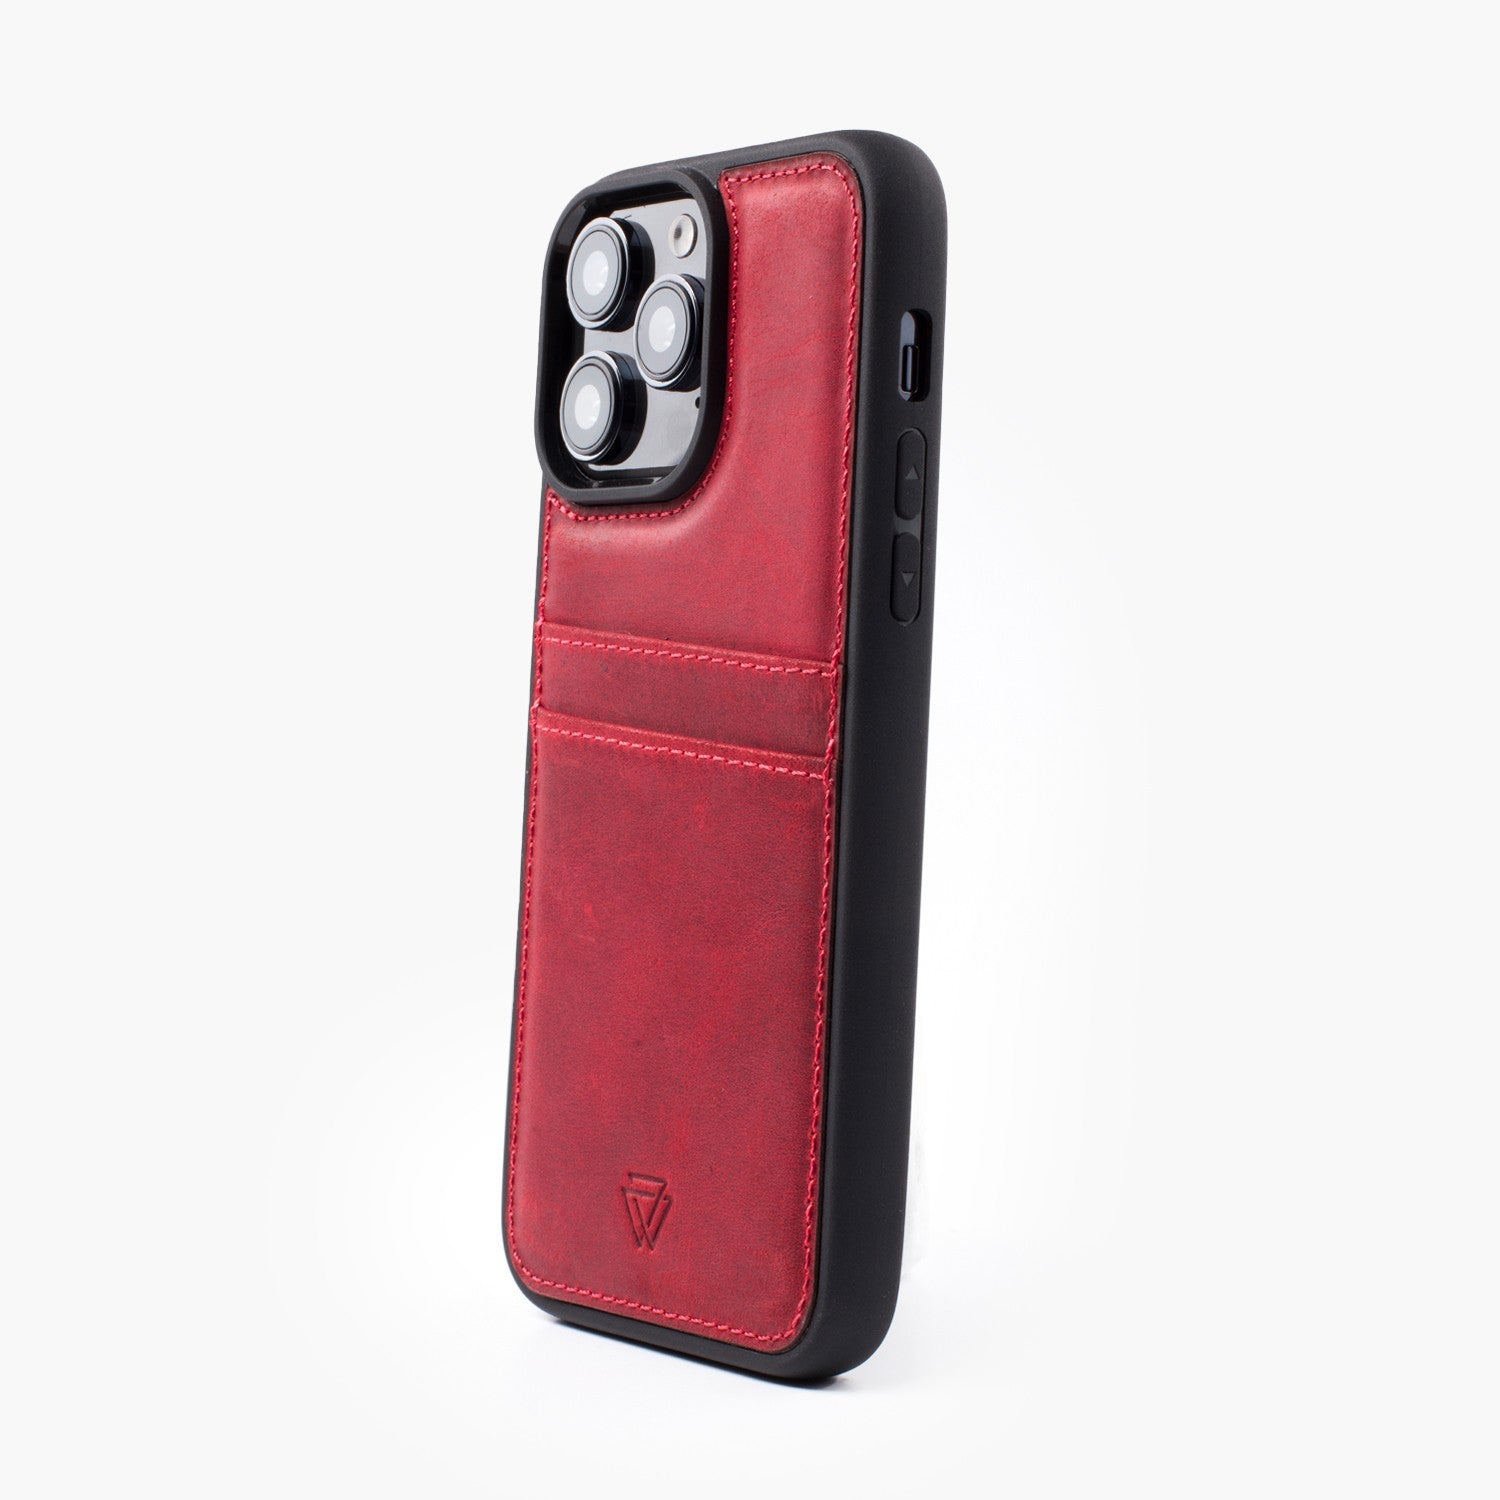 Wachikopa leather Back Cover C.C. Case for iPhone 12 Pro Max Red